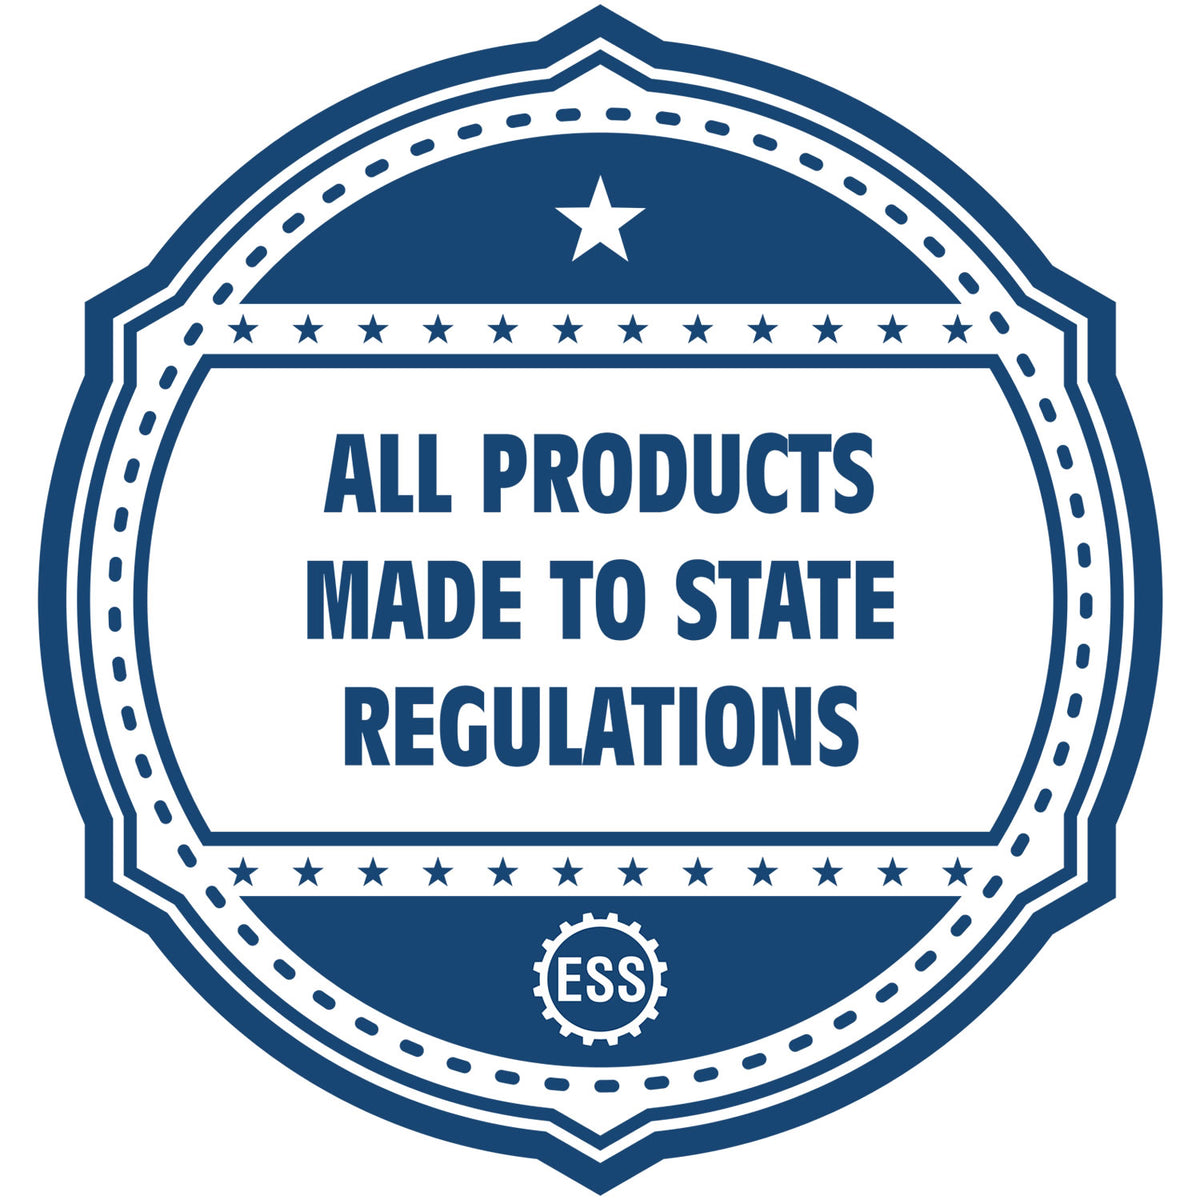 A blue icon or badge for the Digital Texas Geologist Stamp, Electronic Seal for Texas Geologist showing that this product is made in compliance with state regulations.